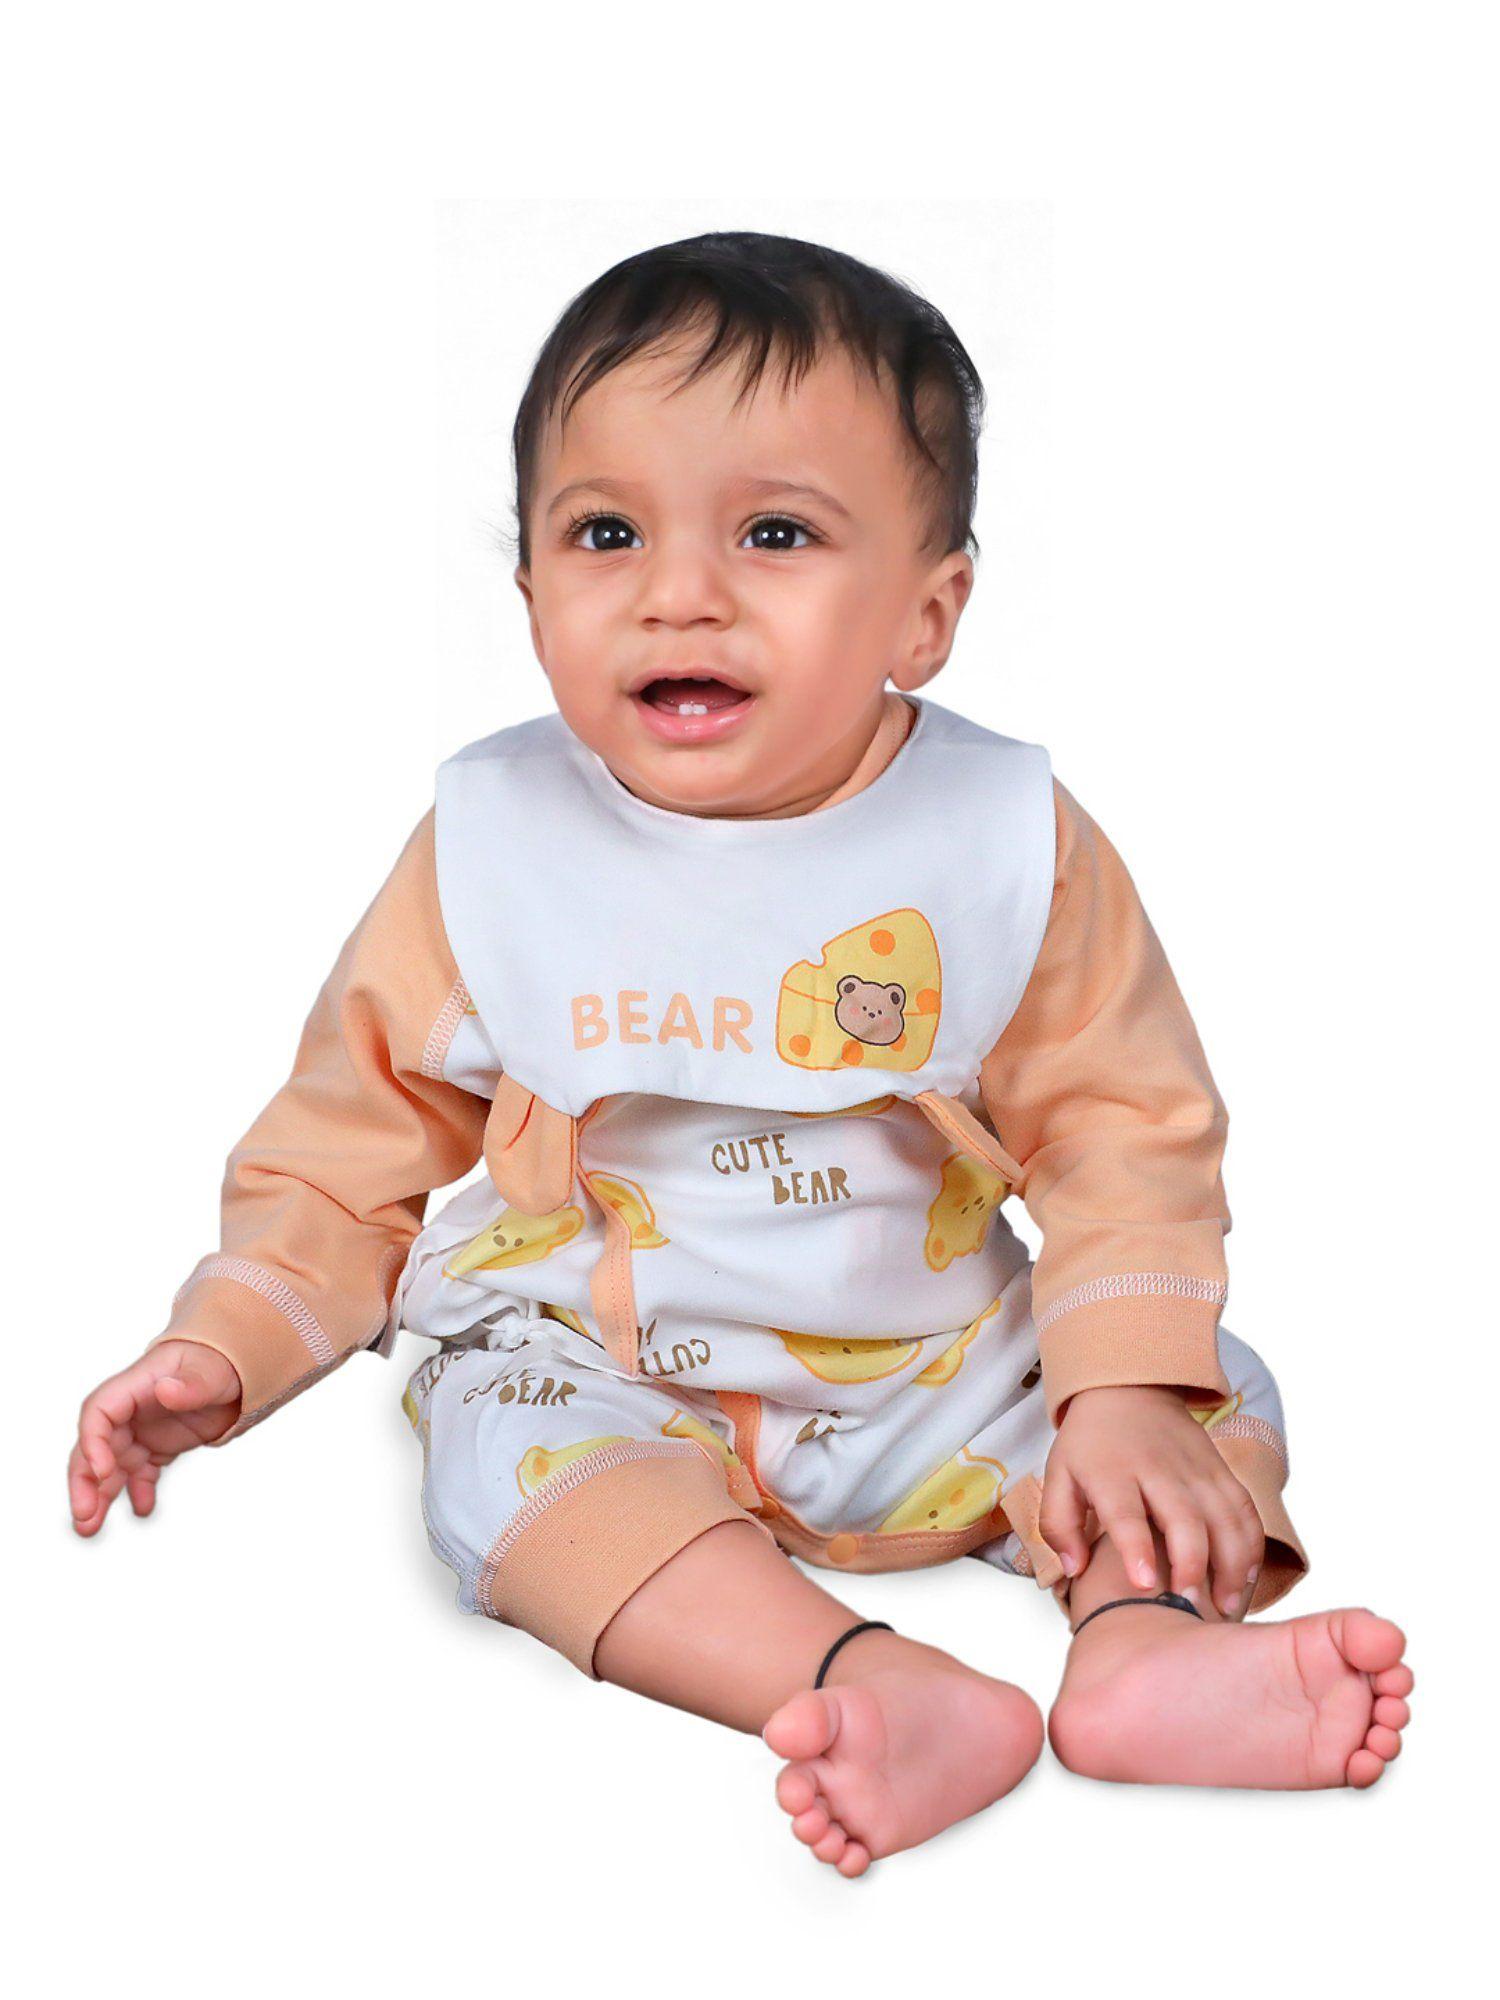 cute-bear-body-suit-with-snap-buttons-tie-knot-and-matching-bib-(set-of-2)